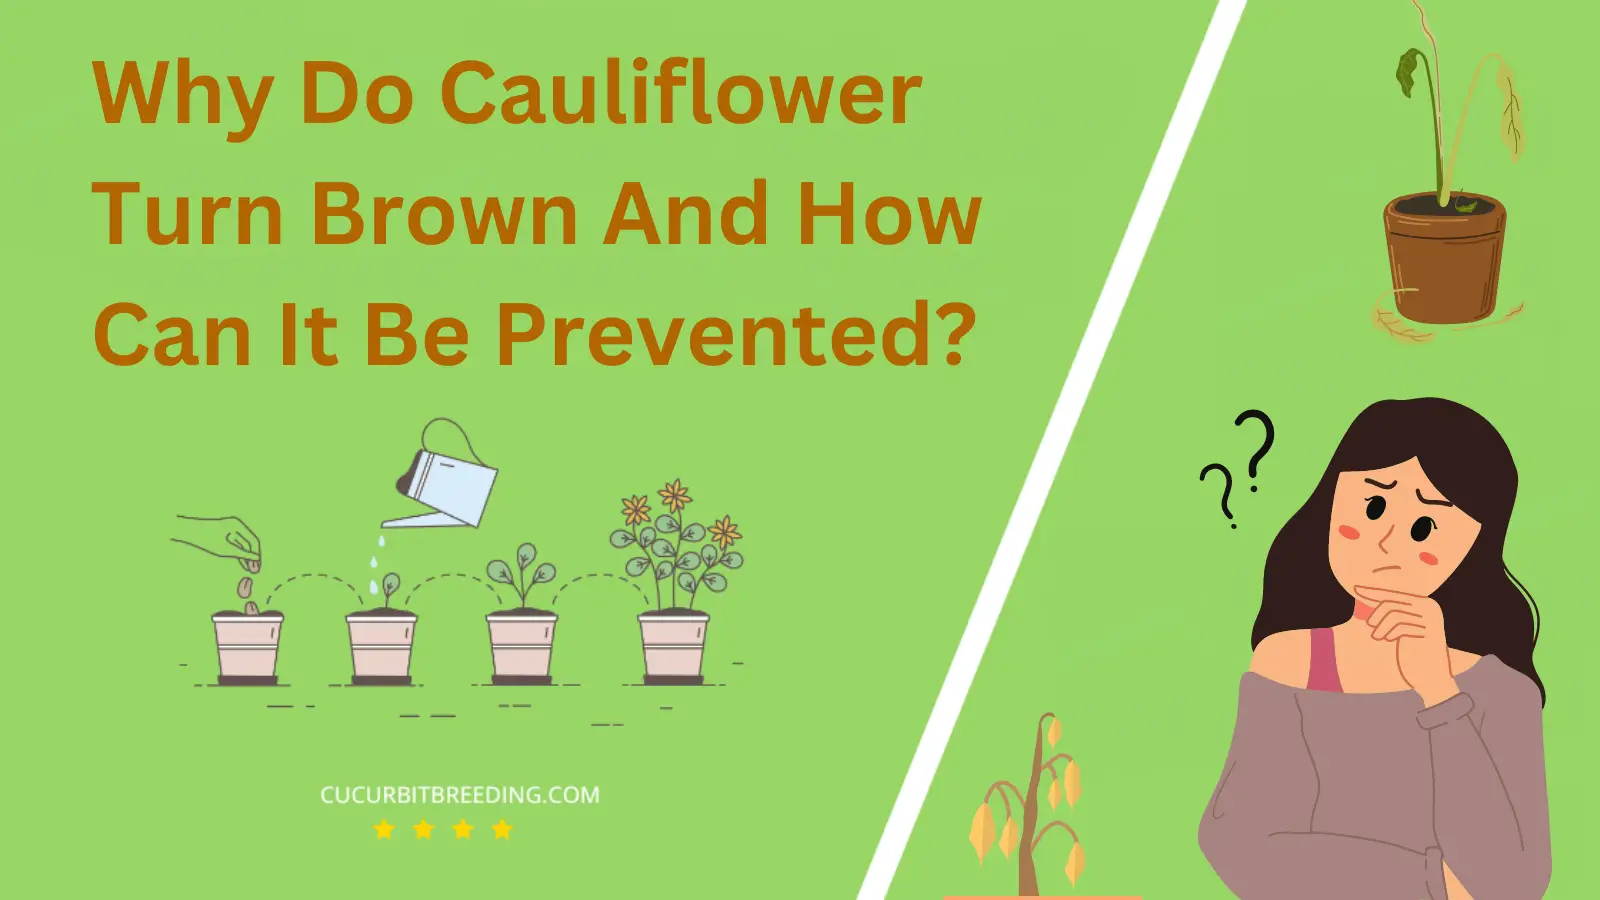 Why Do Cauliflower Turn Brown And How Can It Be Prevented